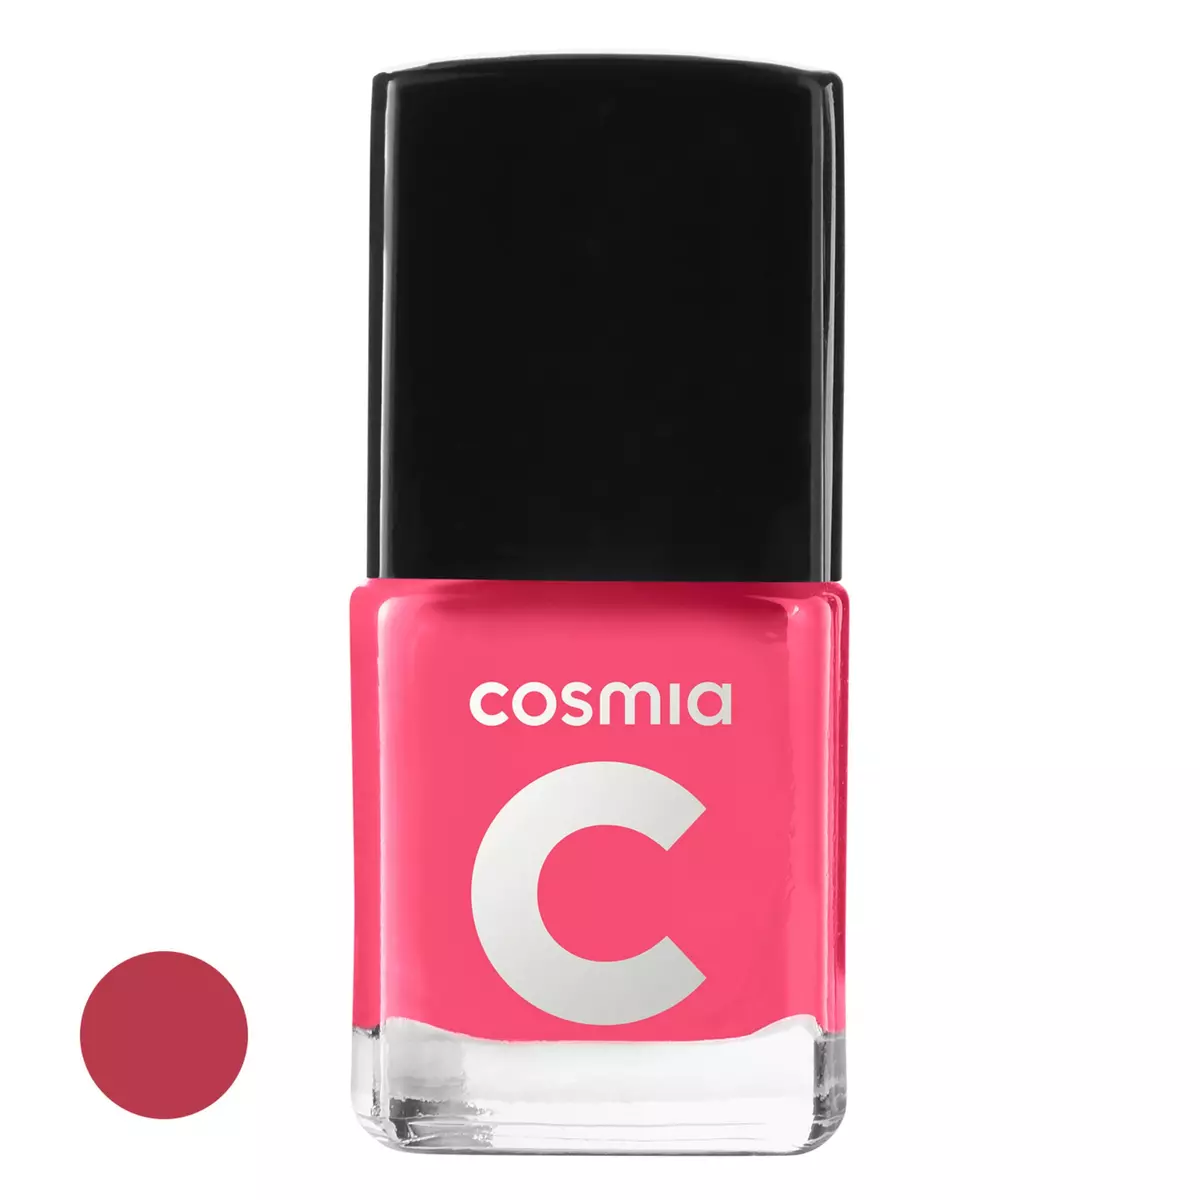 COSMIA BY AUCHAN Cosmia vernis à ongles rose corail T7 sèchage rapide